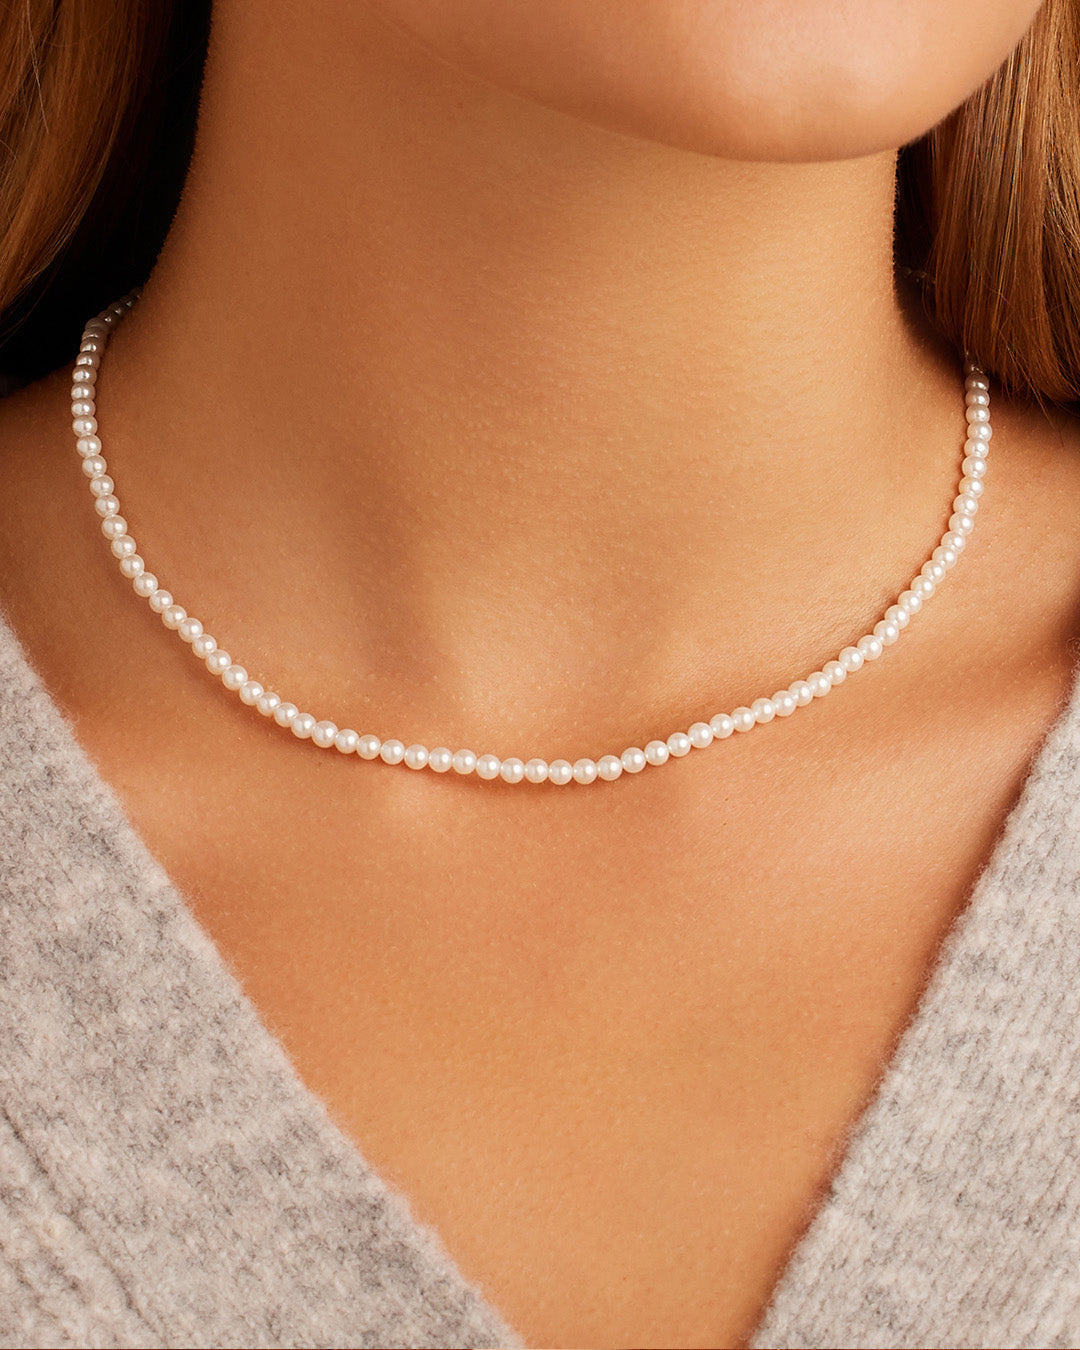 Simple Pearl Necklace in Solid 14K Gold with Large Genuine